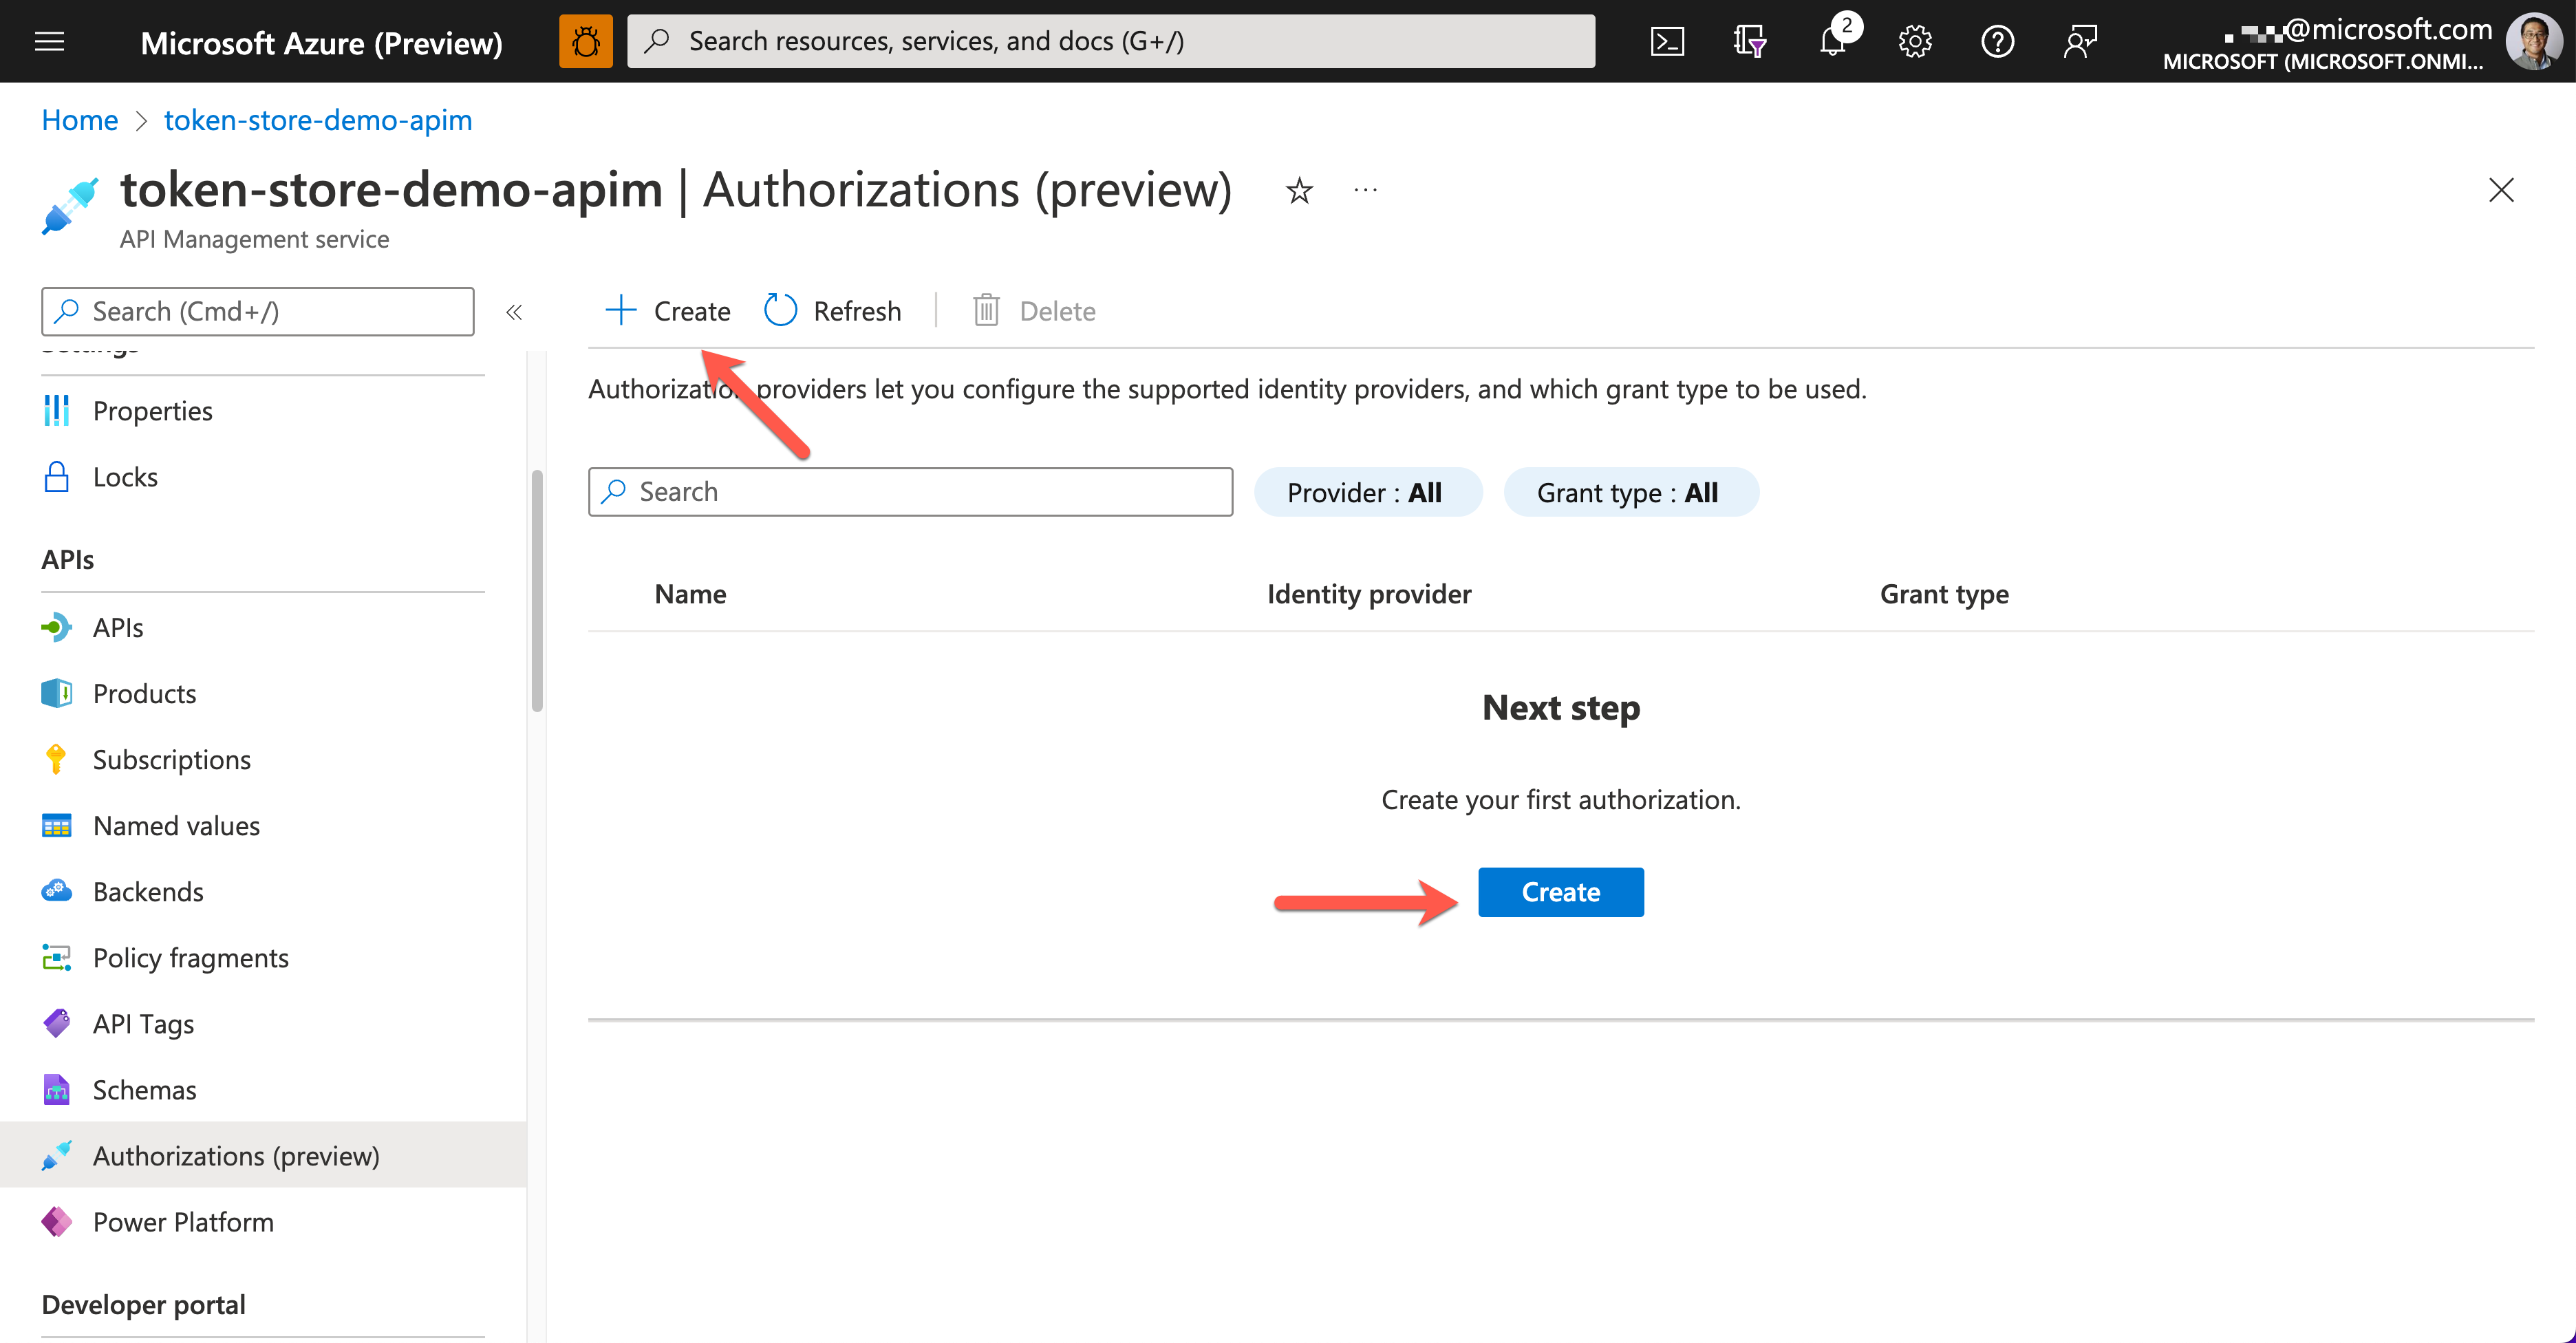 Authorizations Preview Pane